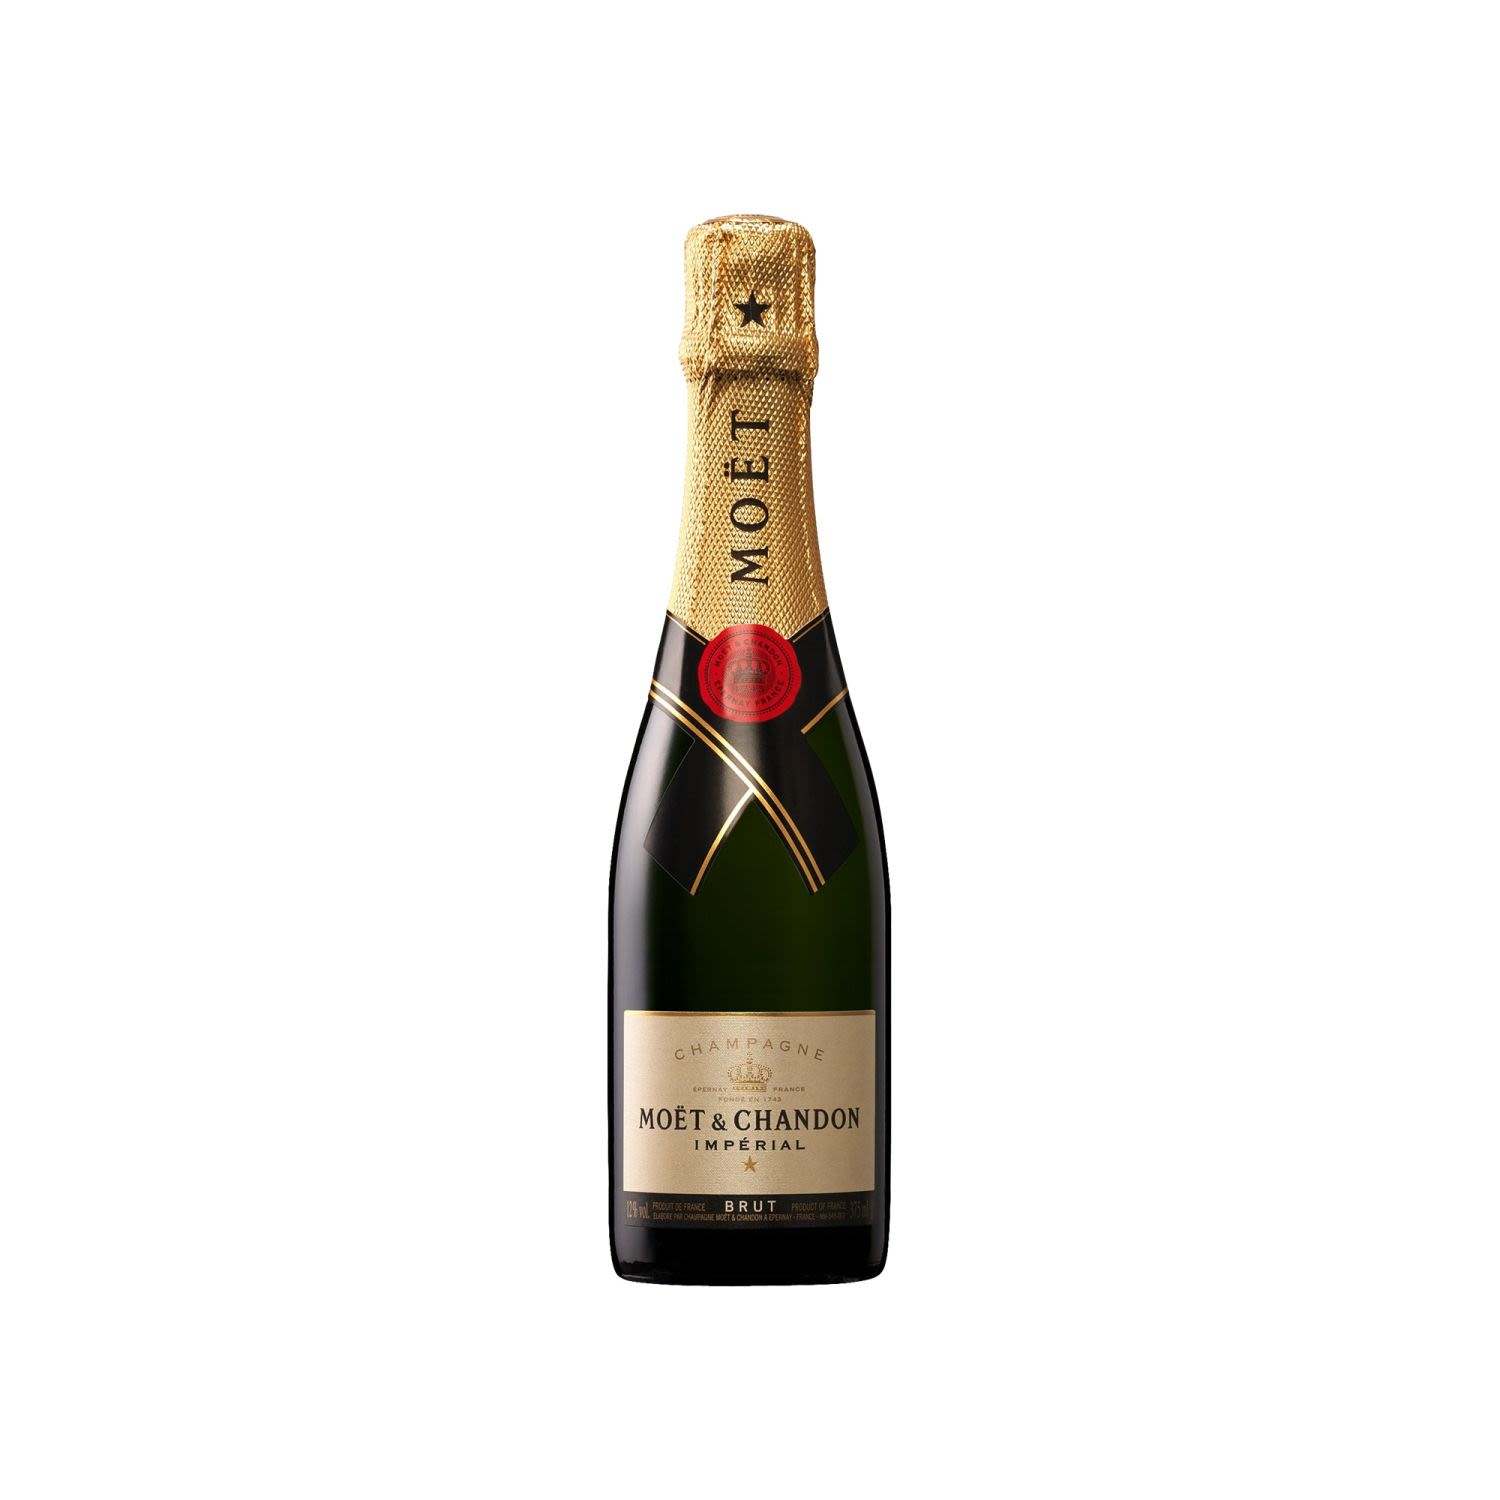 Moët & Chandon Impérial is the House’s iconic Champagne. It embodies Moët & Chandon’s unique style - a style distinguished by its bright fruitiness, its seductive palate and its elegant maturity.<br /> <br />Alcohol Volume: 12.00%<br /><br />Pack Format: Bottle<br /><br />Standard Drinks: 3.6<br /><br />Pack Type: Bottle<br /><br />Country of Origin: France<br /><br />Region: Champagne<br /><br />Vintage: Non Vintage<br />